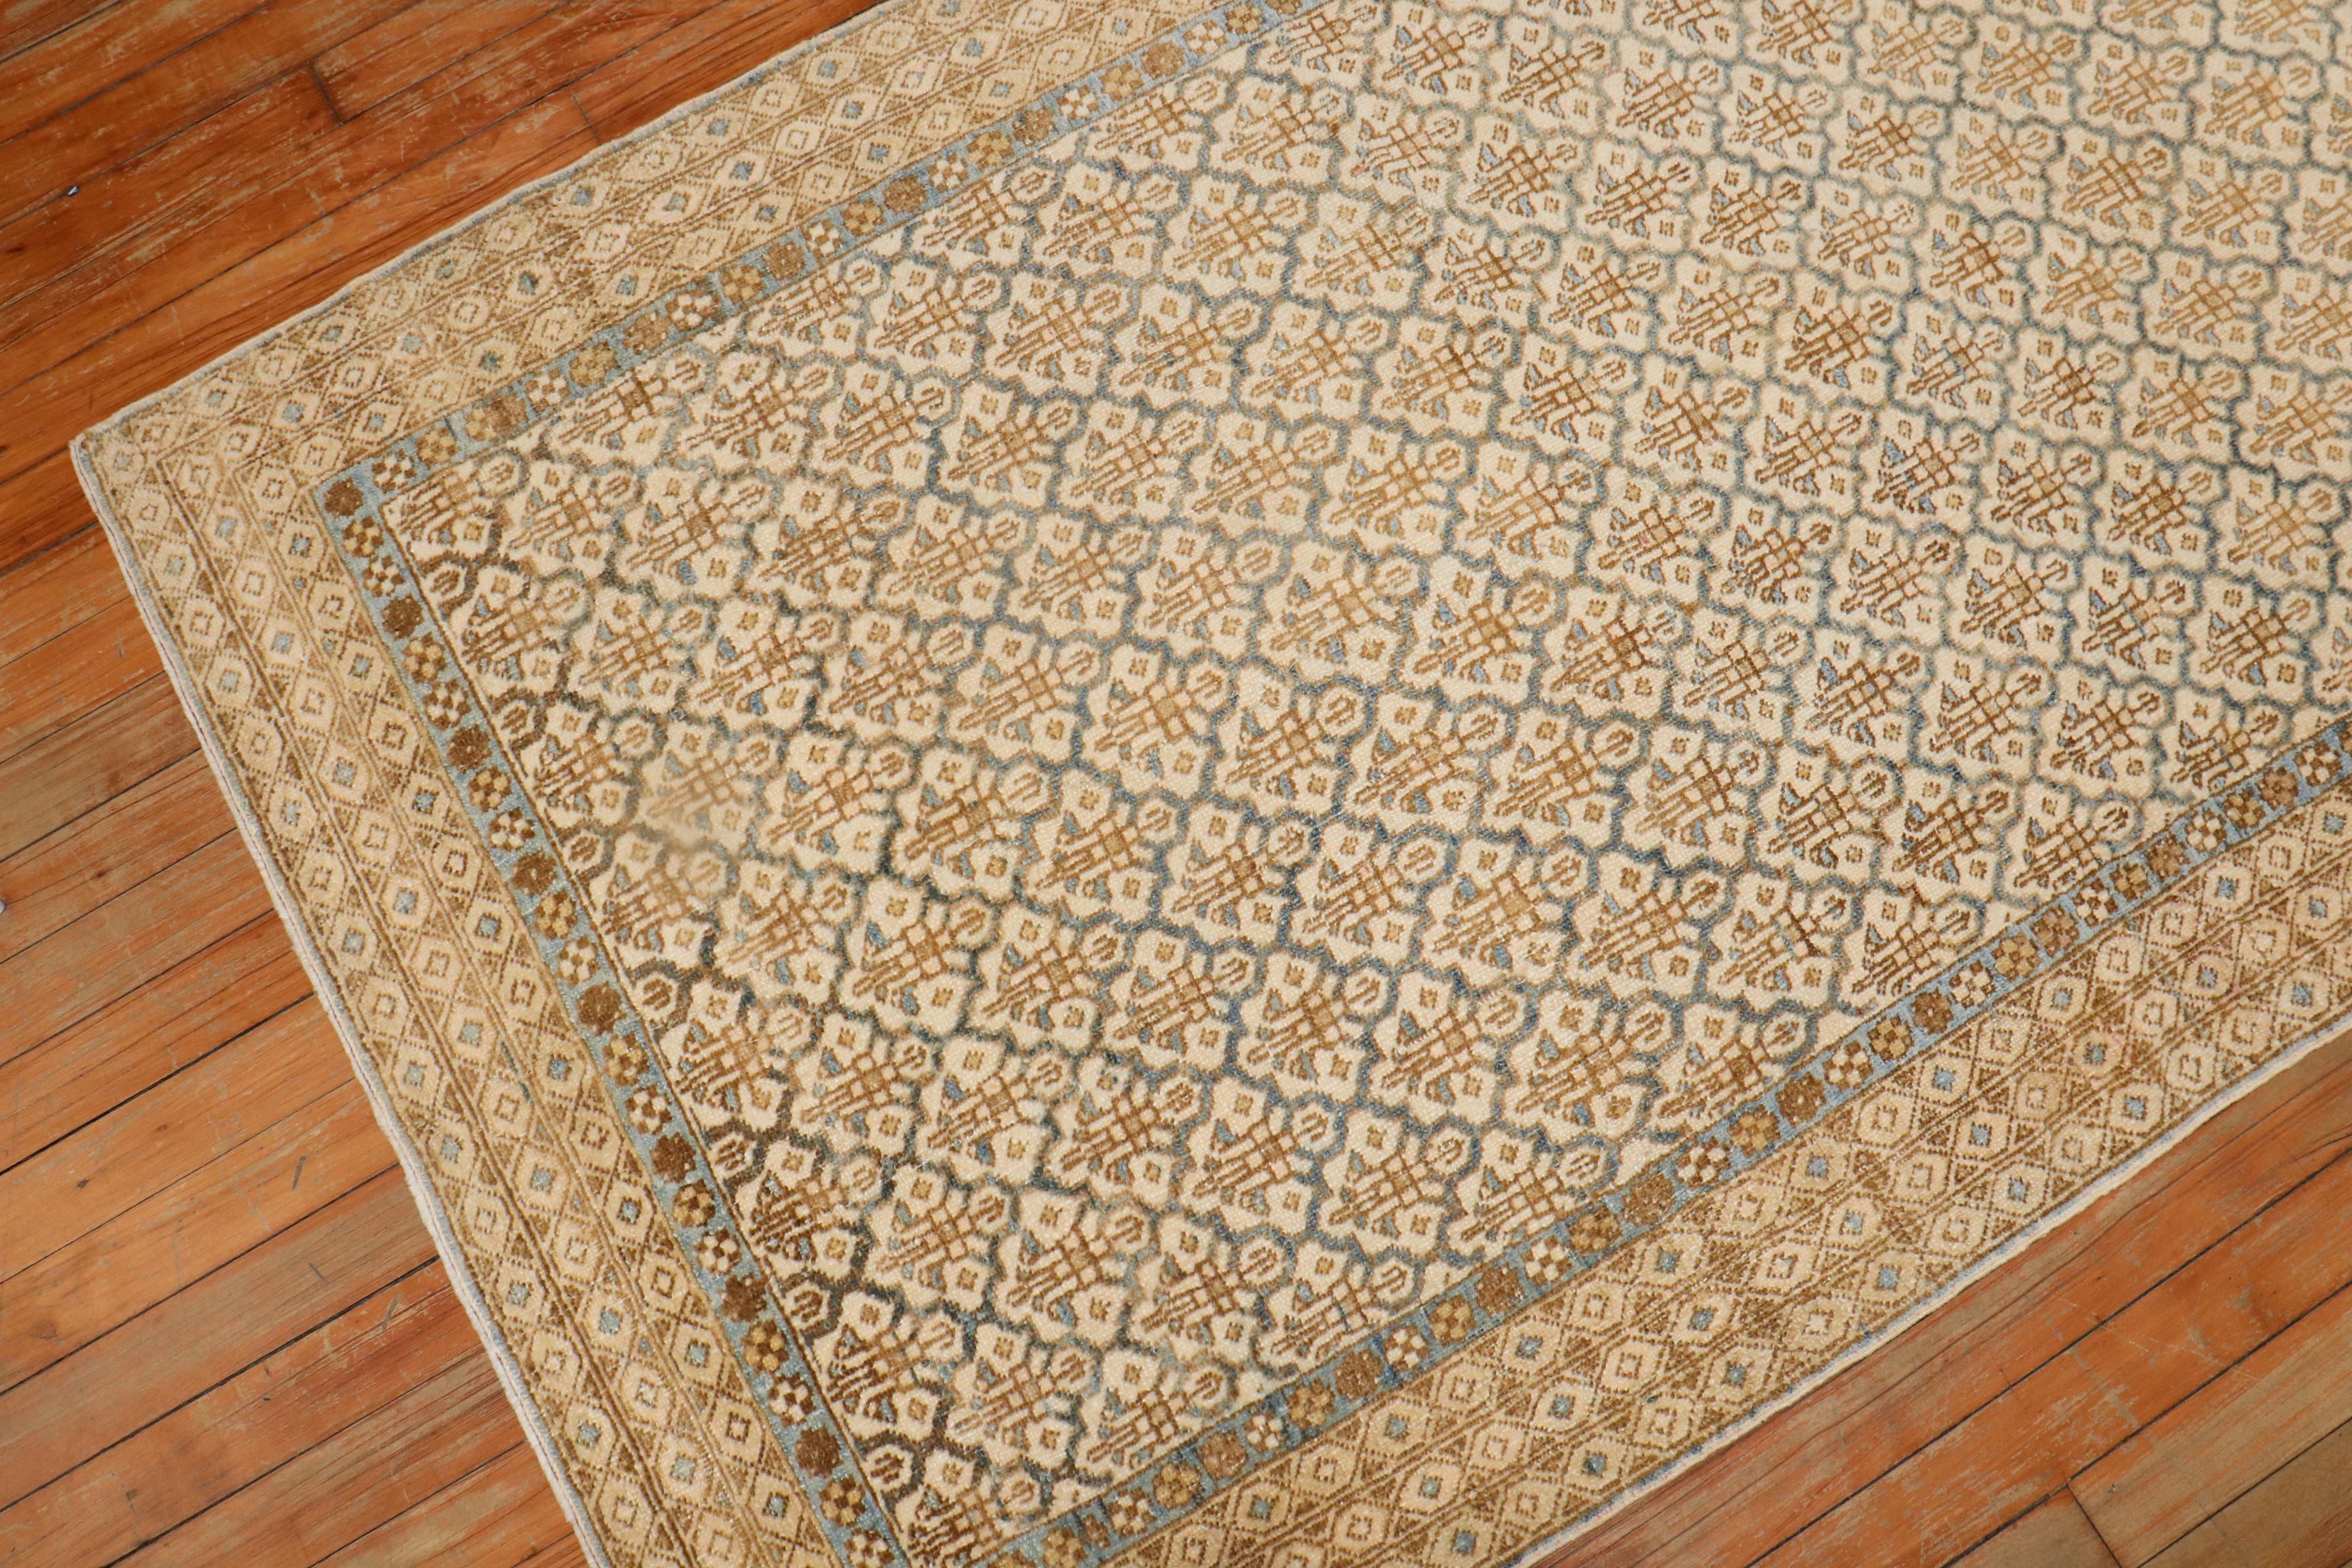 An authentic early 20th century Tribal Serab scatter size rug. Tan, khaki, brow and light blue

Measures: 3'5'' x 5'5''.

